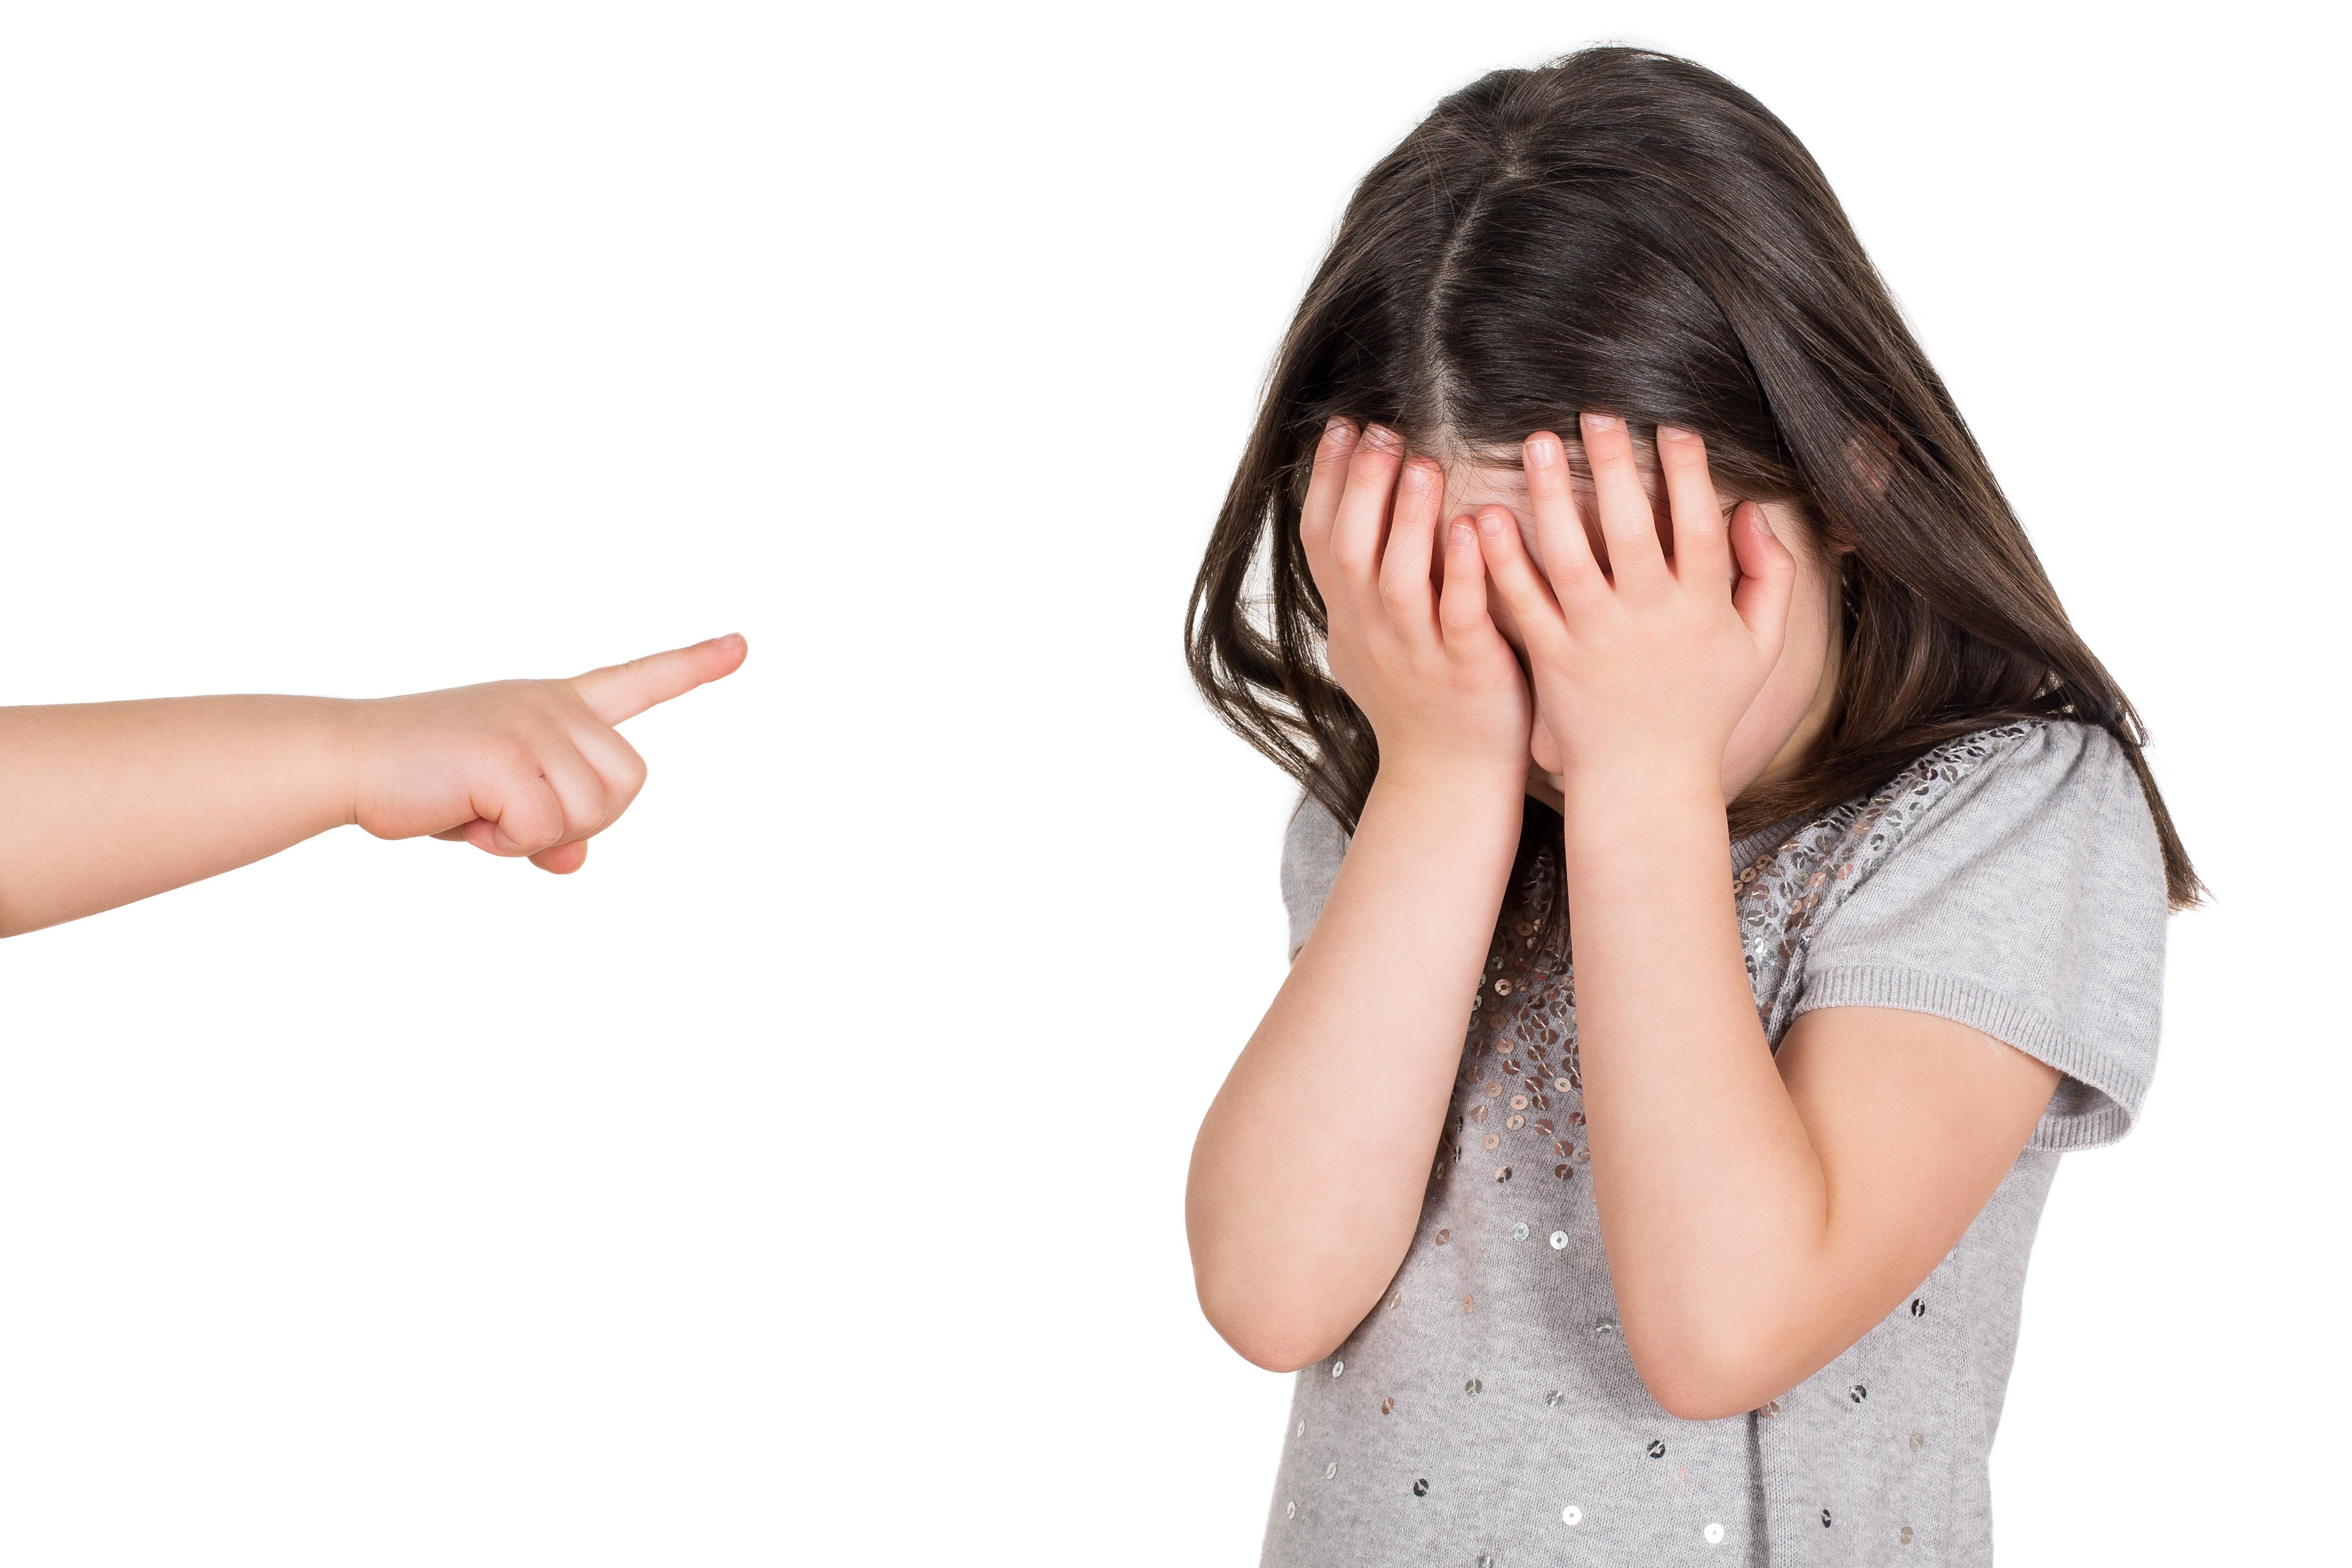 A parent worries about their child’s friendship and whether to do anything about it. Photo: Alamy